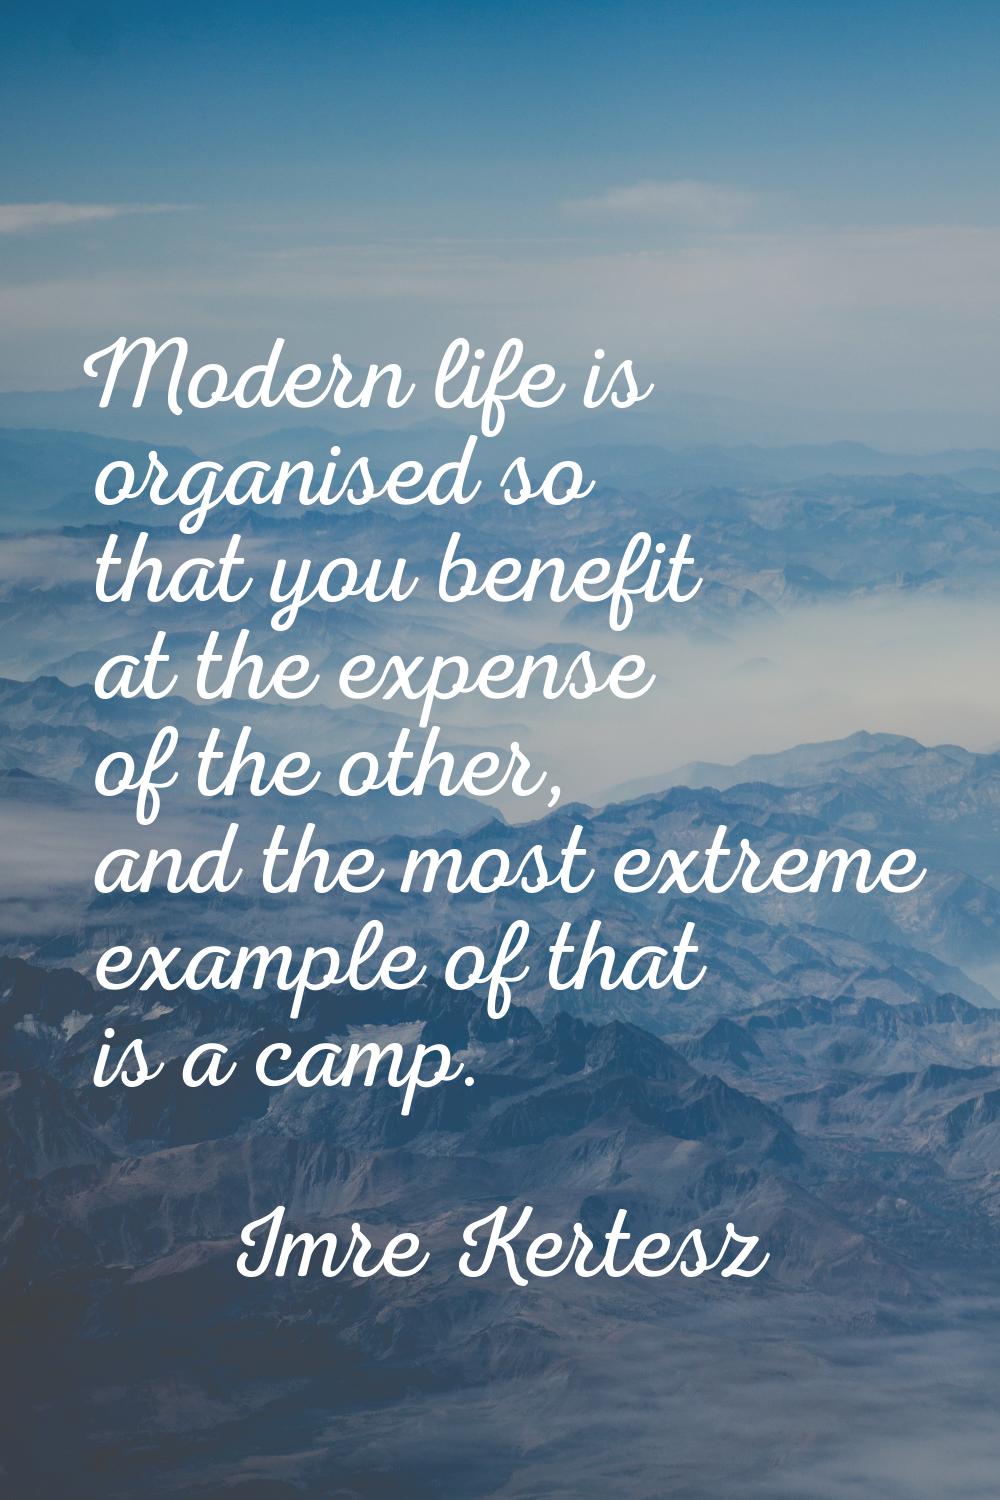 Modern life is organised so that you benefit at the expense of the other, and the most extreme exam